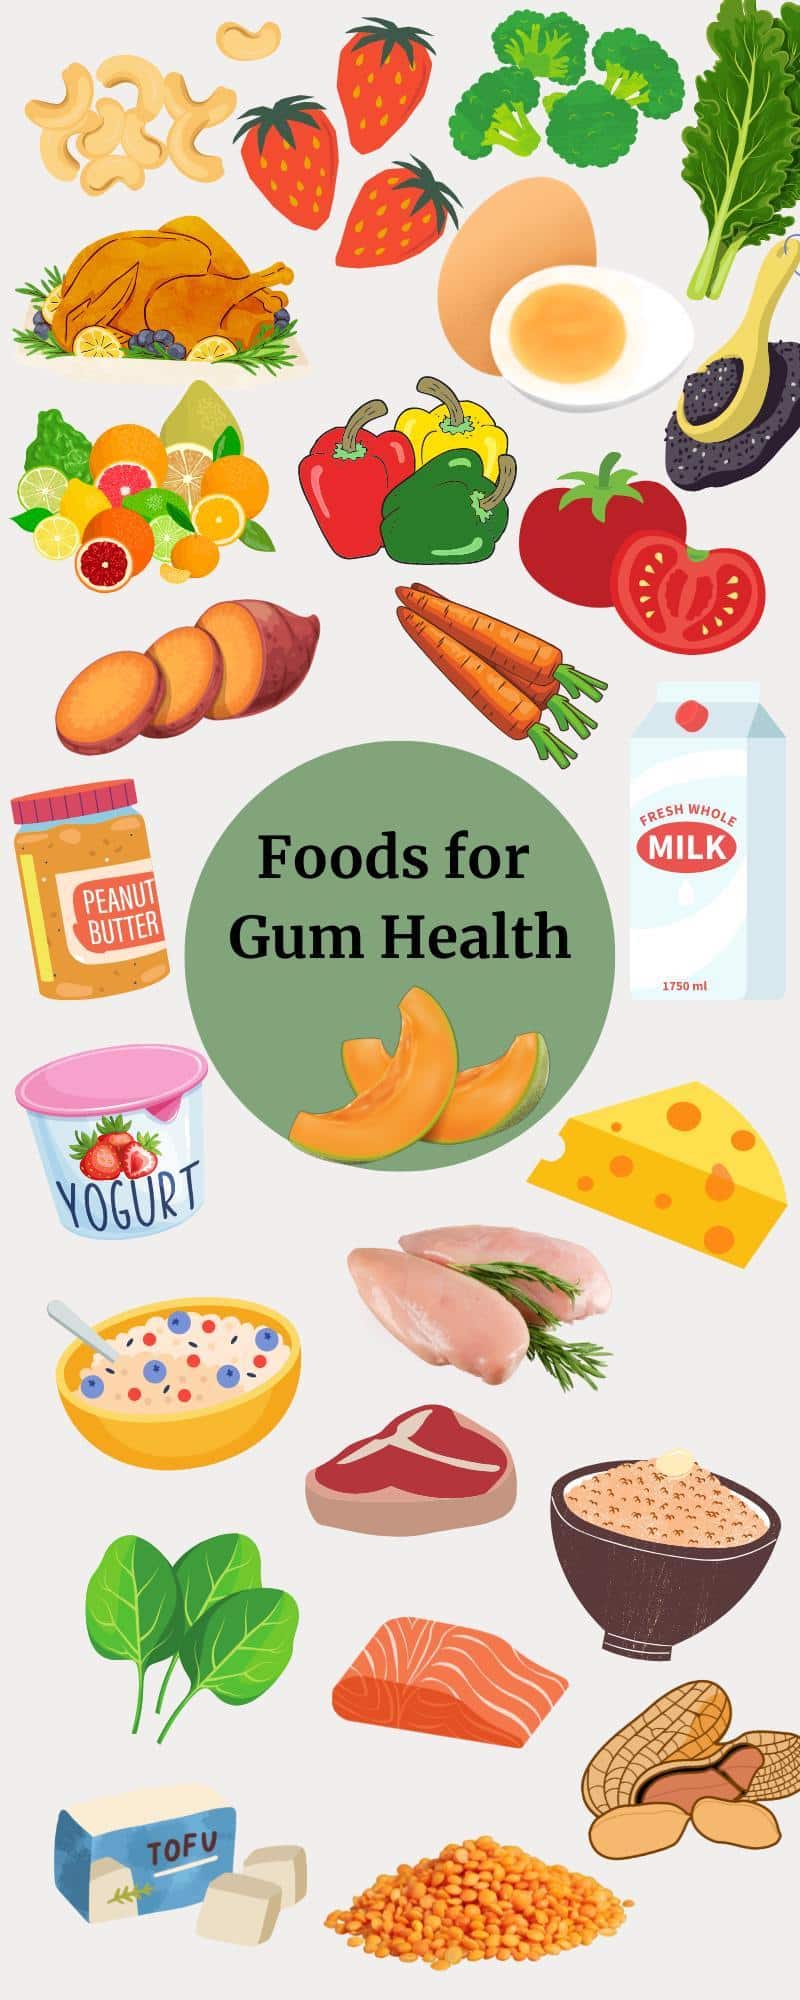 Foods for gum health in graphics: cashews, strawberries, broccoli, kale, turkey, egg, chia seeds, citrus, peppers, tomatoes, sweet potato, carrots, whole milk, peanut butter, cantaloupe, yogurt, cheese, chicken, oatmeal, beef, brown rice, spinach, salmon, peanuts, tofu, lentils.